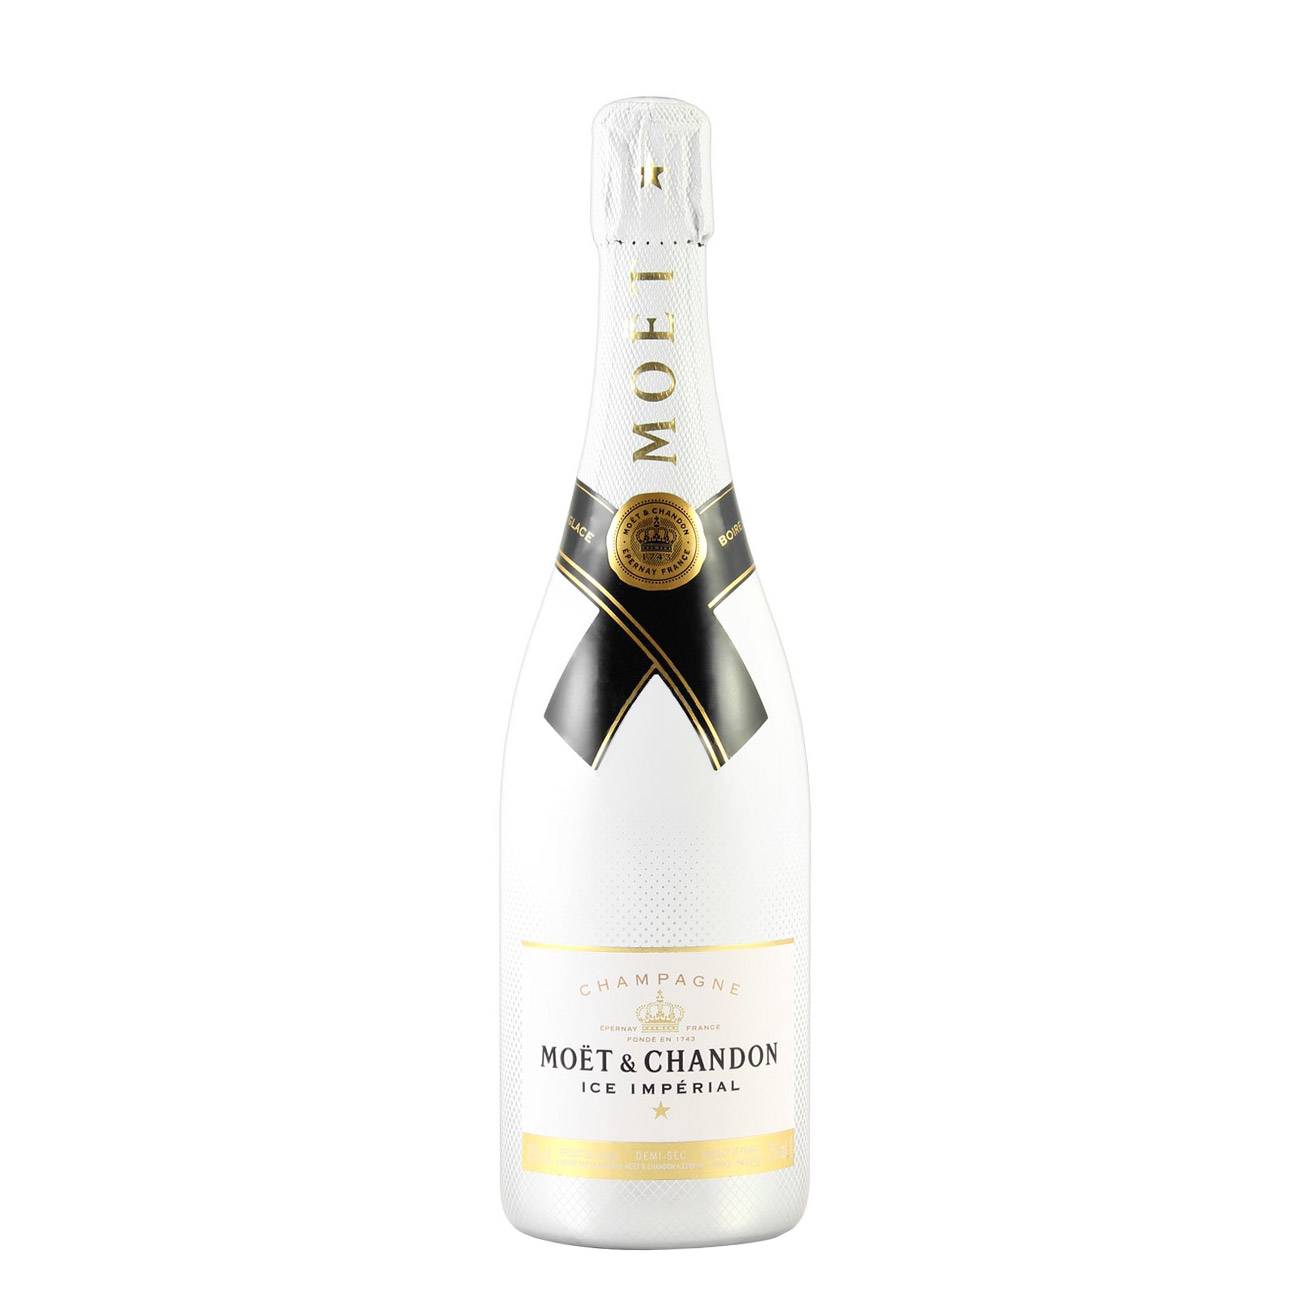 CHANDON ICE IMPERIAL 750 ml